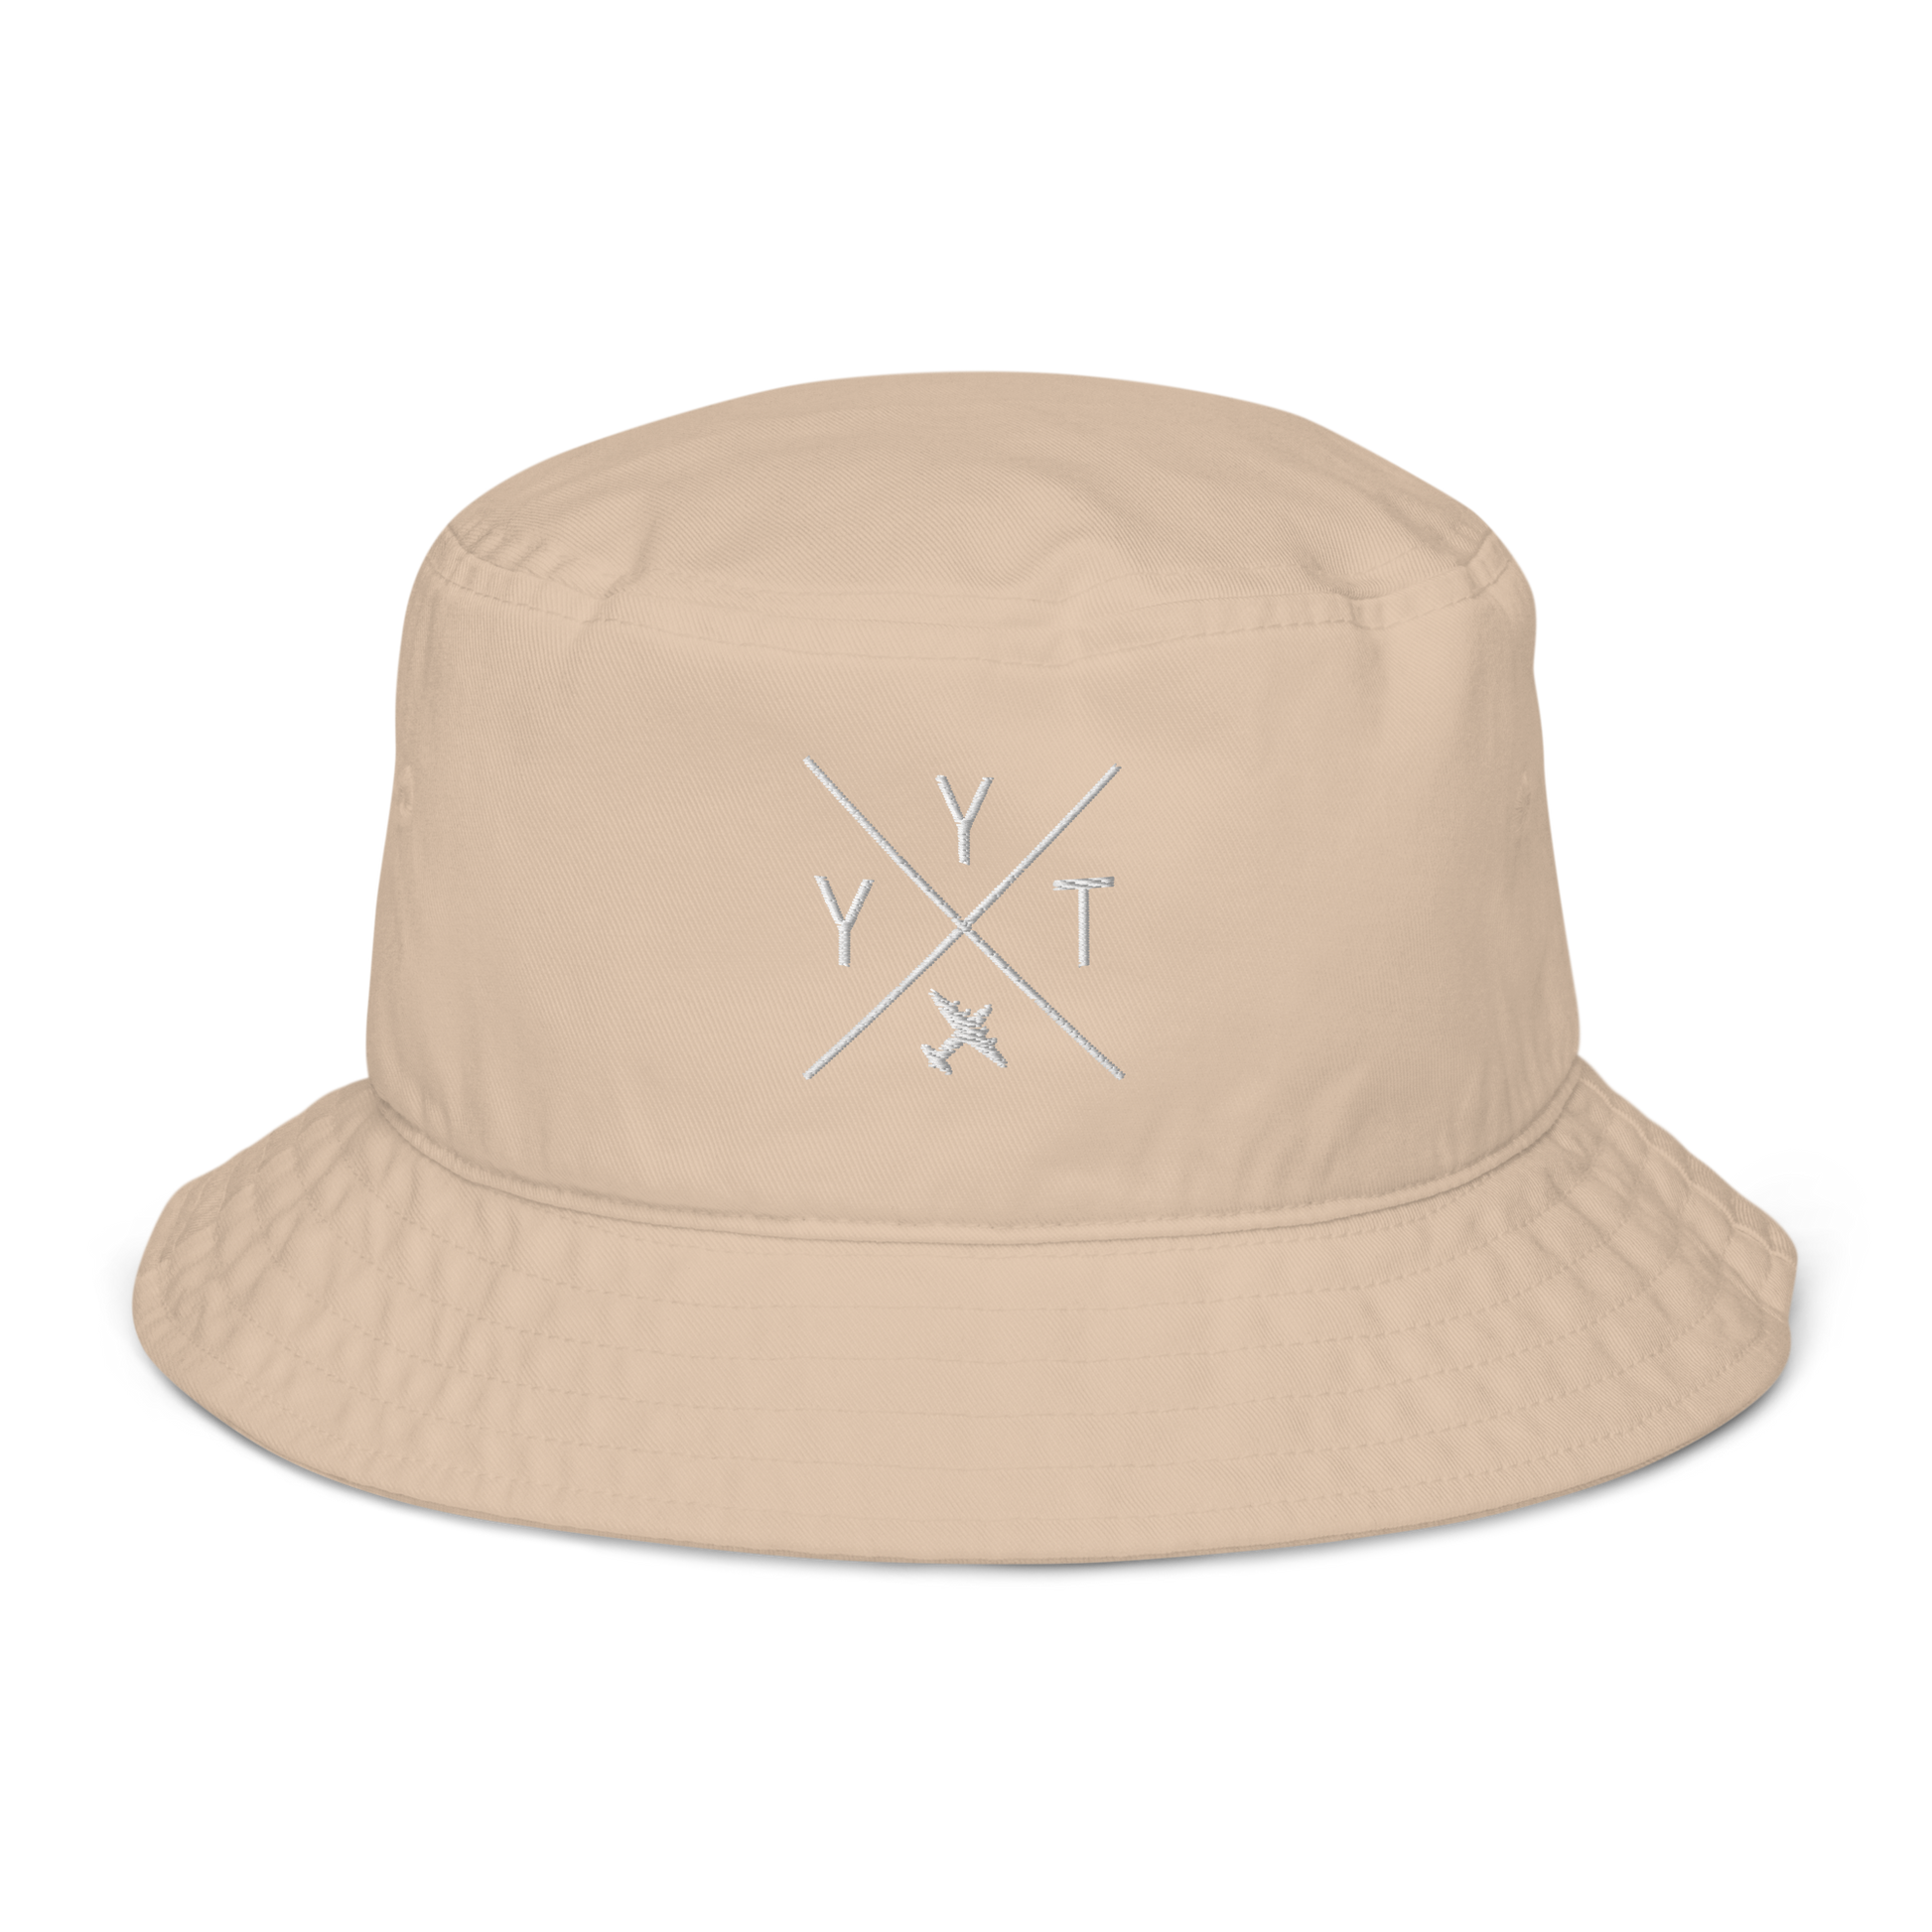 YHM Designs - YYT St. John's Organic Cotton Bucket Hat - Crossed-X Design with Airport Code and Vintage Propliner - White Embroidery - Image 08